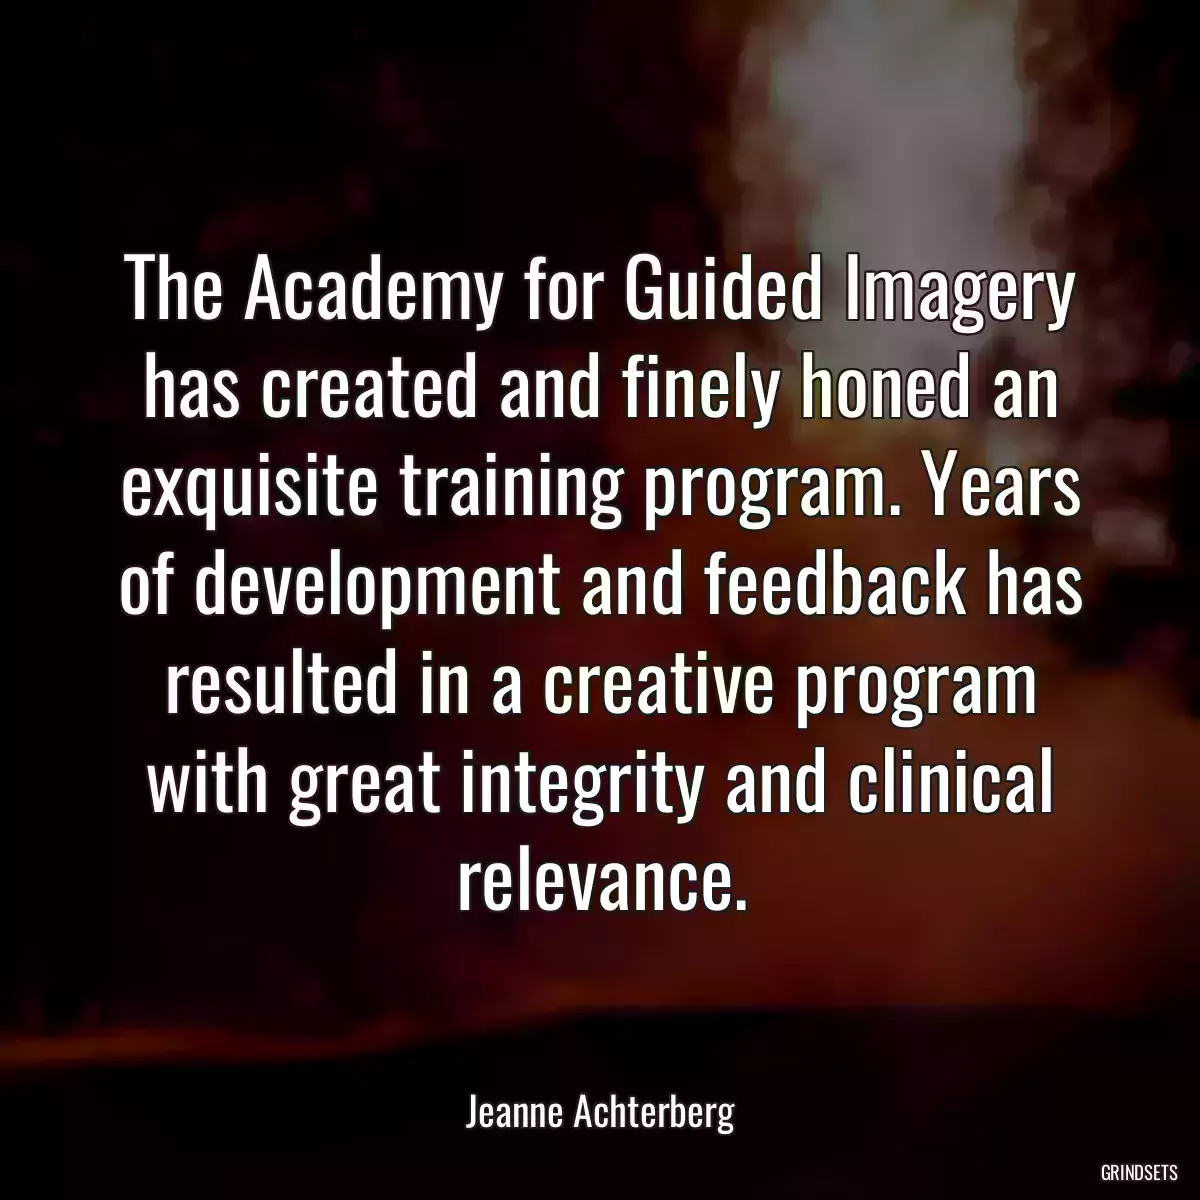 The Academy for Guided Imagery has created and finely honed an exquisite training program. Years of development and feedback has resulted in a creative program with great integrity and clinical relevance.